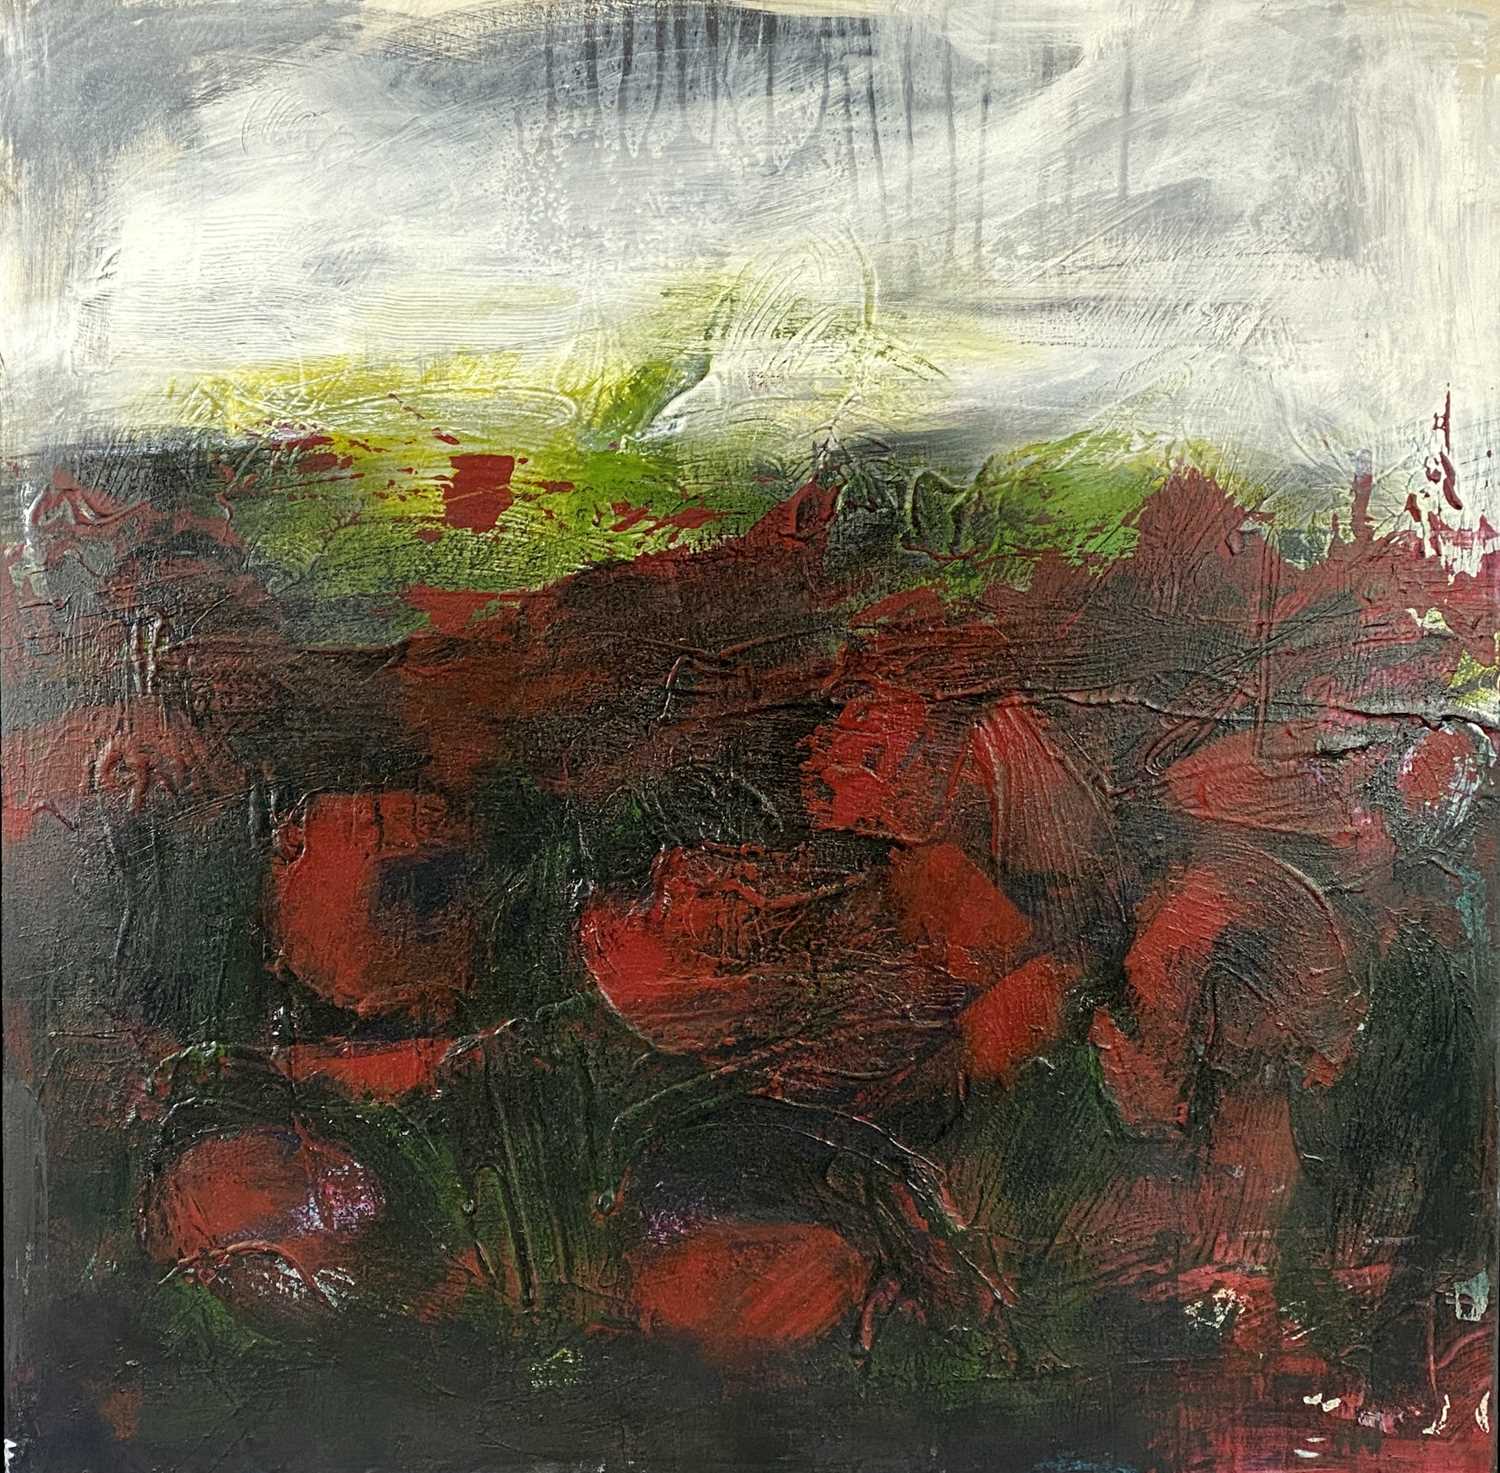 ‡ IAN H. WATKINS acrylic and gesso on plywood - entitled verso "The Enchanted Poppies", dated